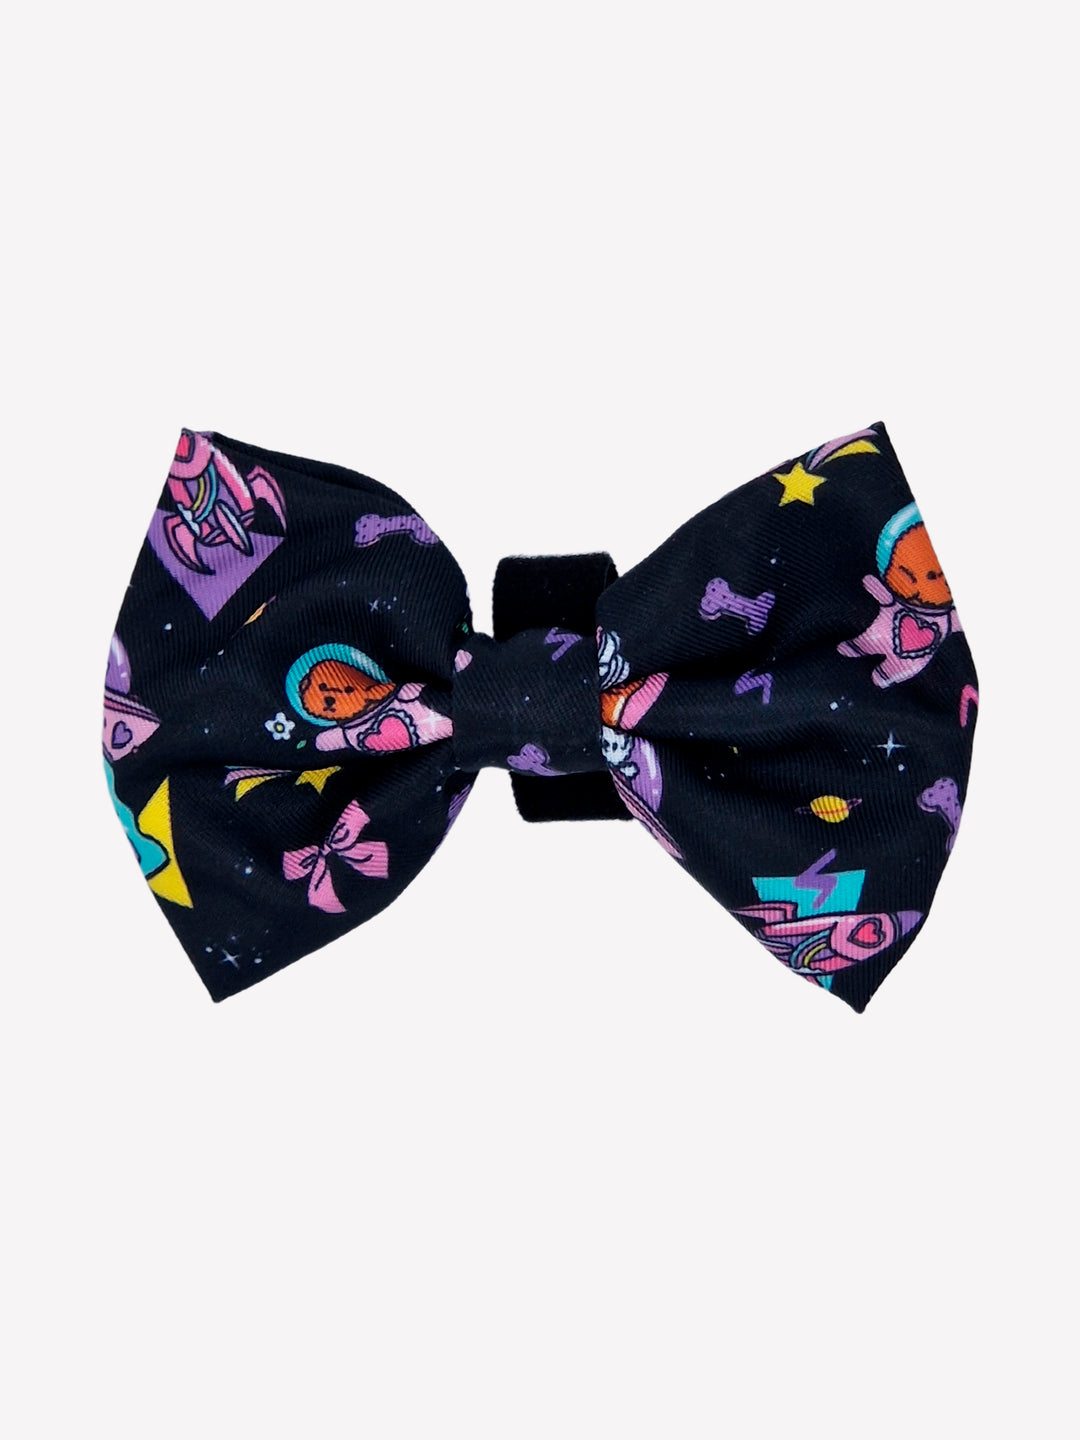 PINK GALAXY BOW TIE FOR DOGS